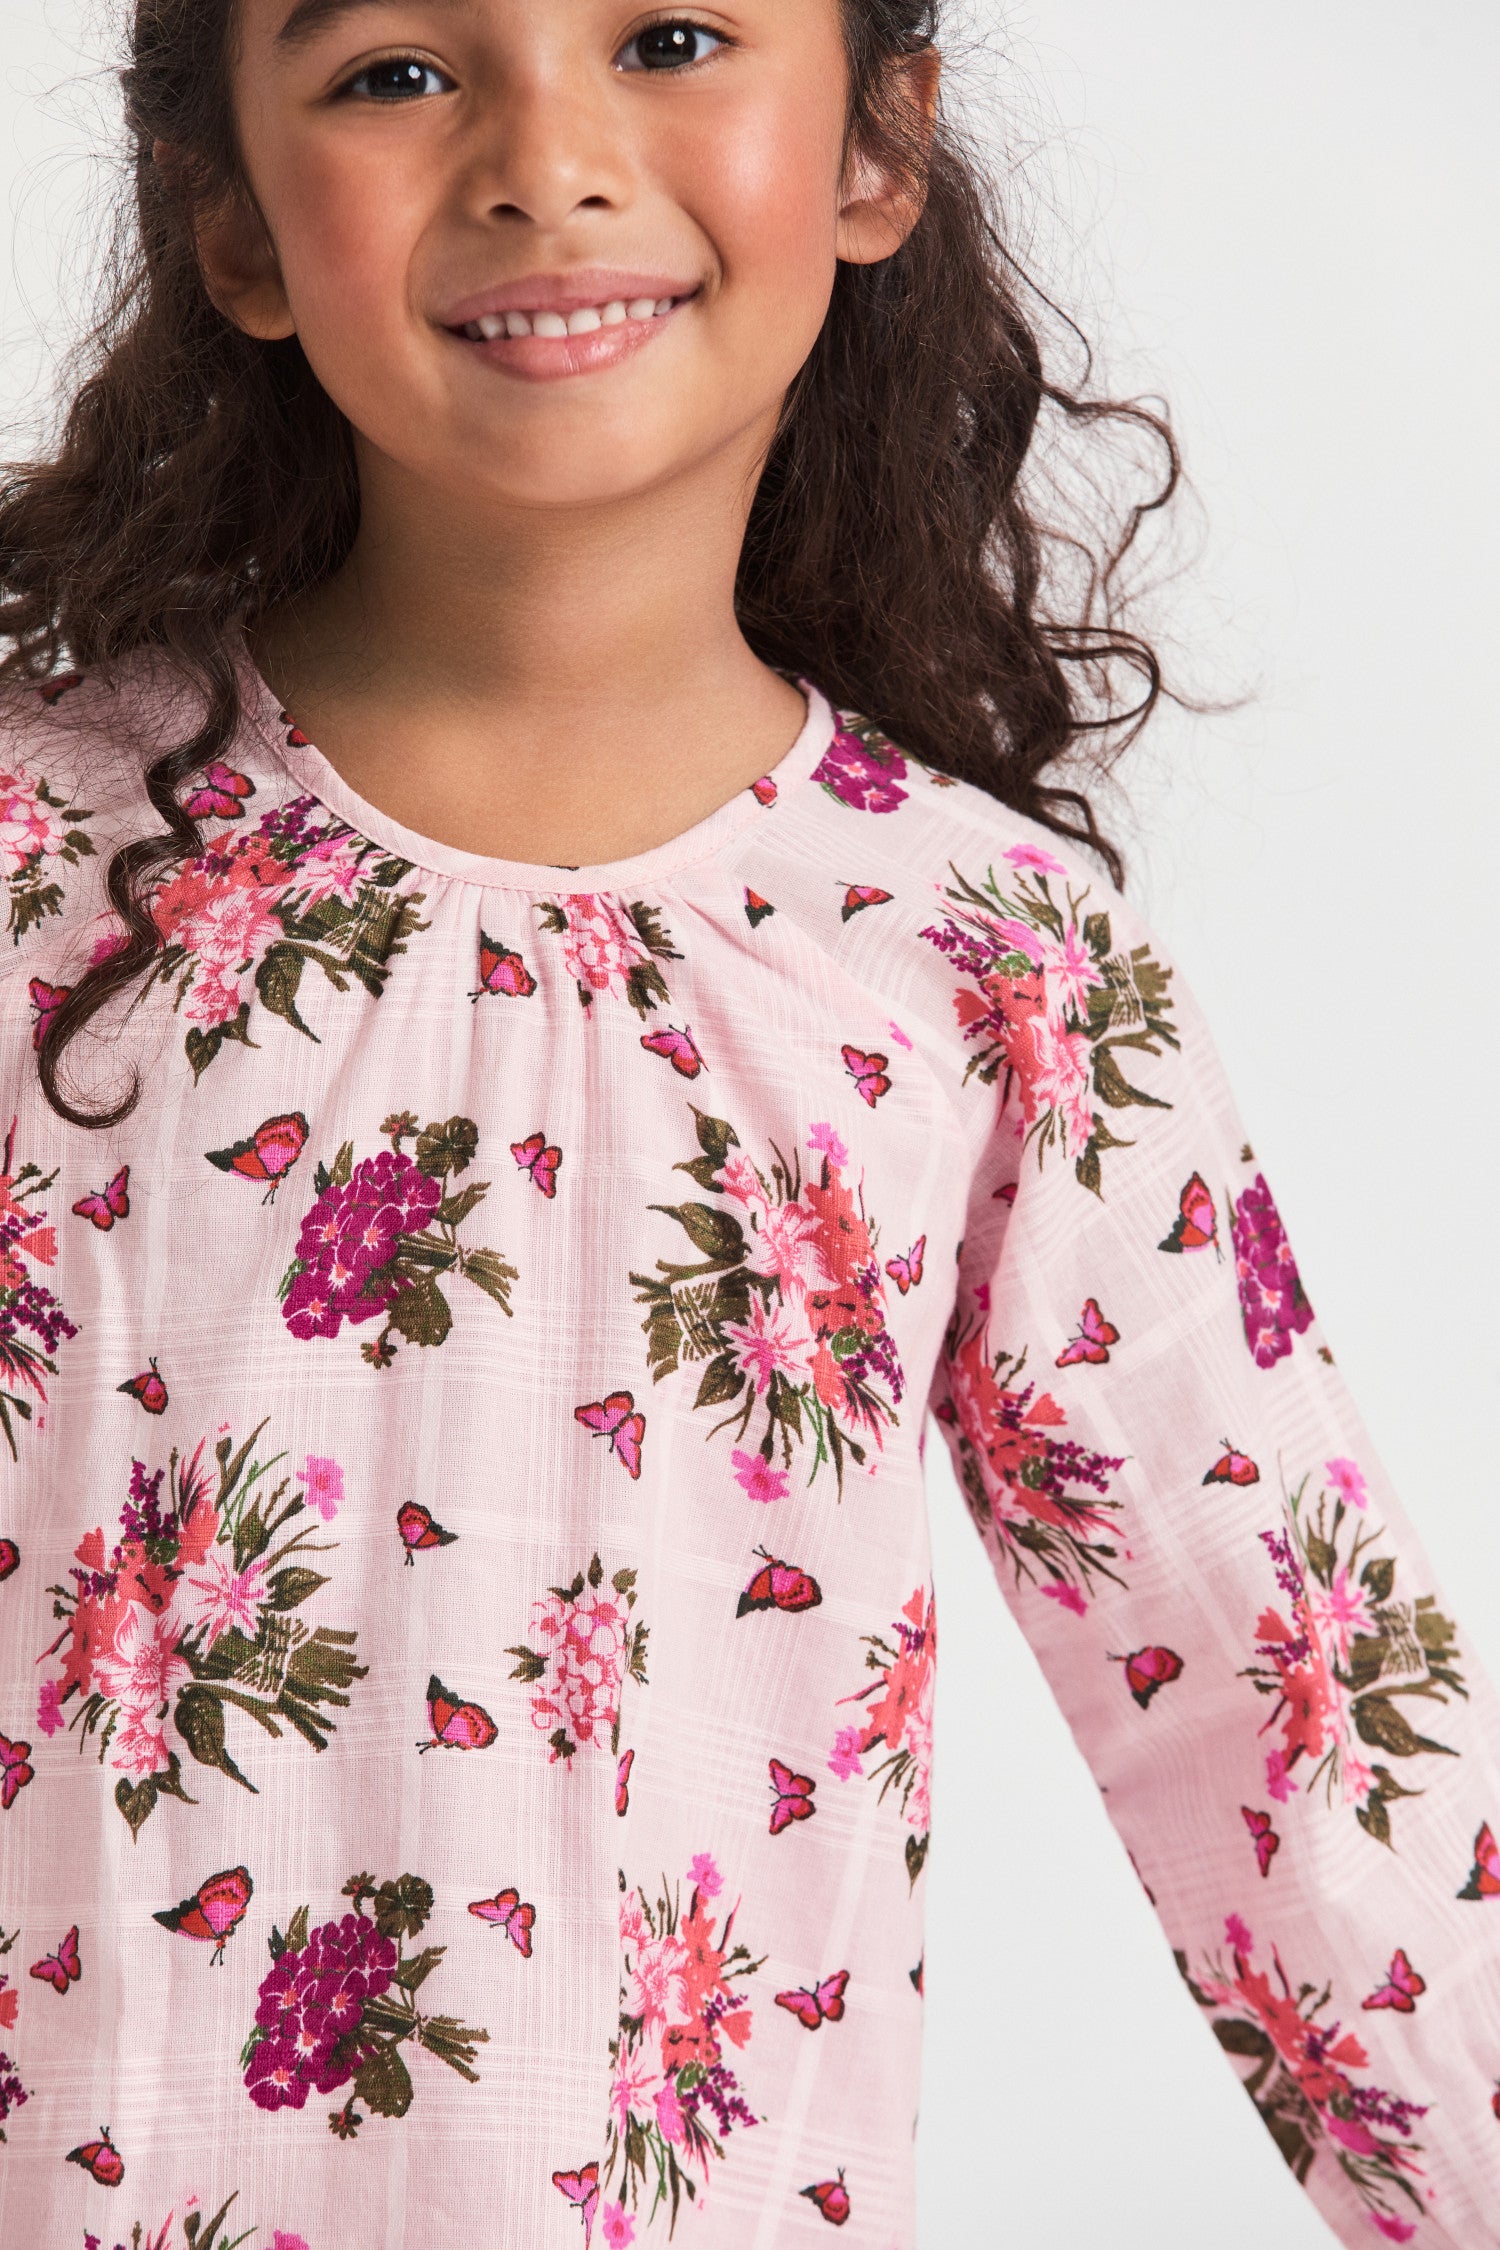 Girls floral pink print dress with long-sleeves.